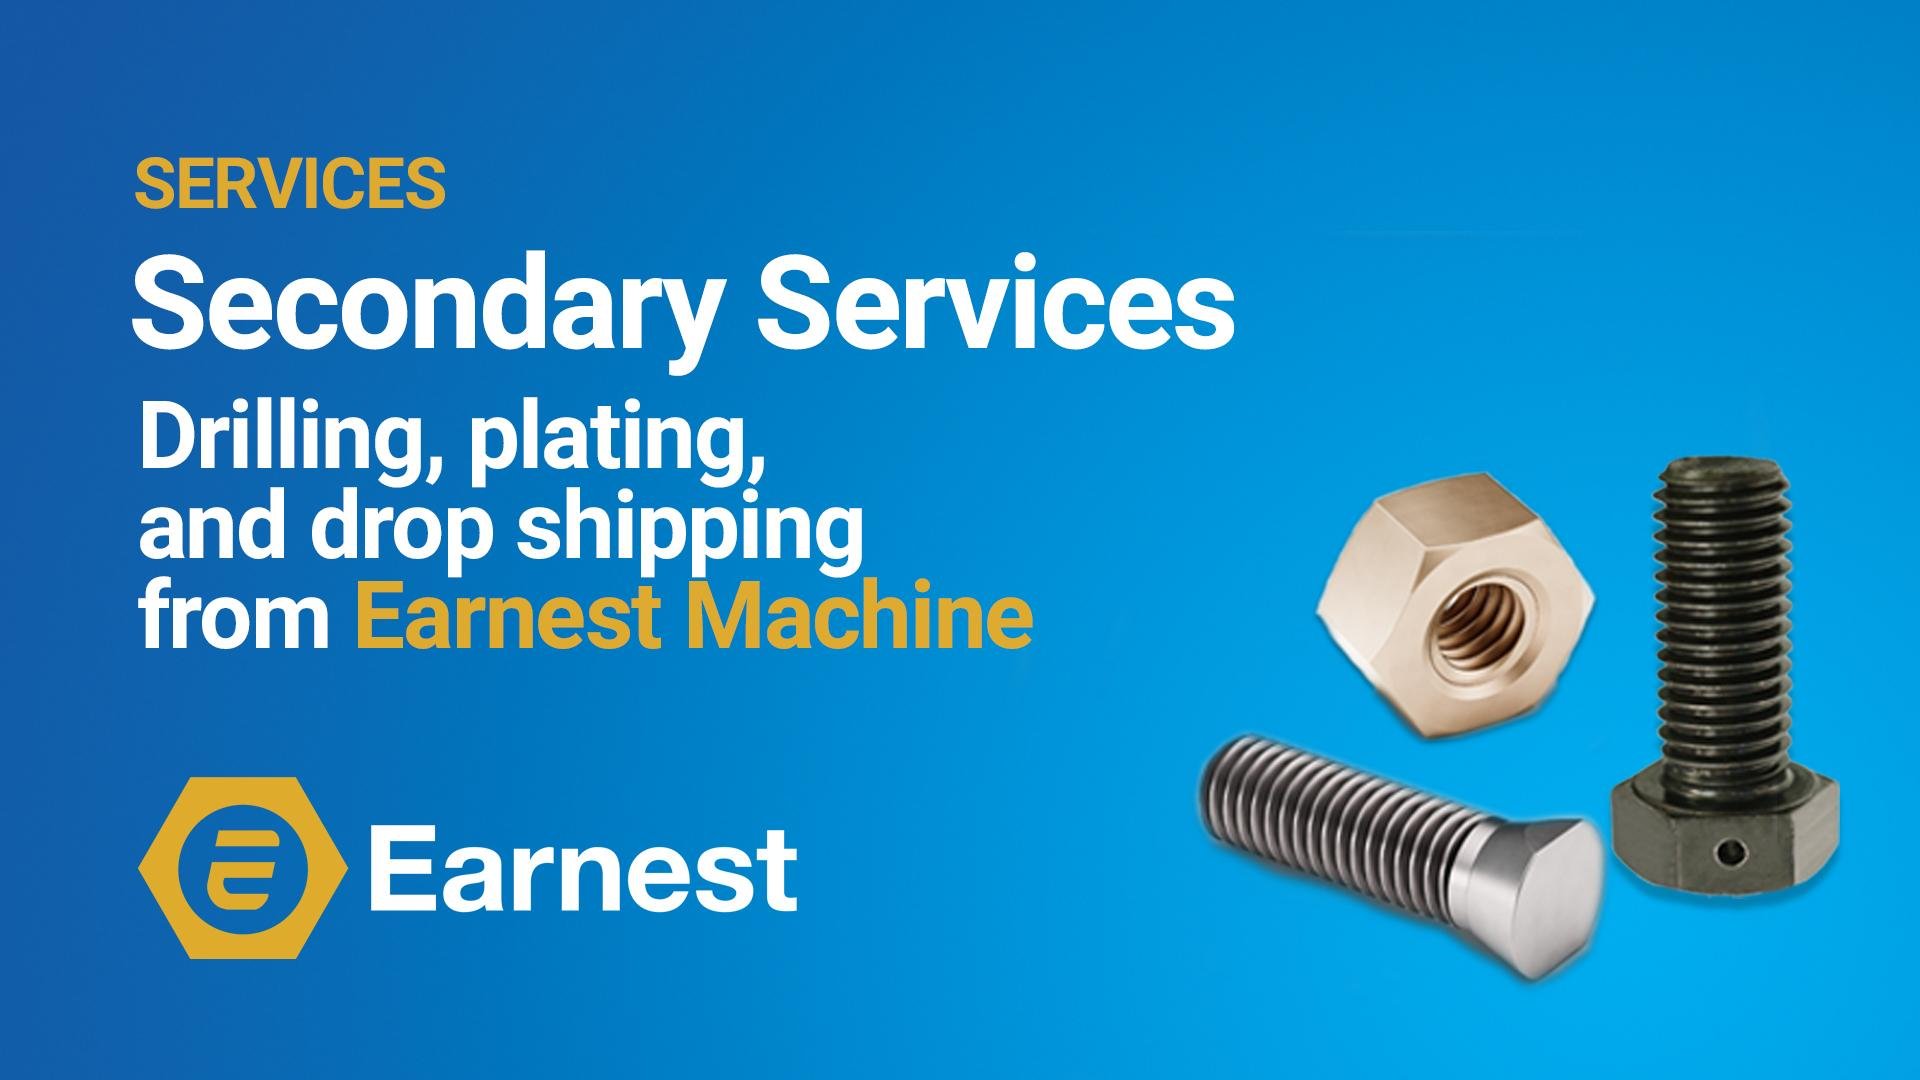 Earnest Machine's Secondary Services | Earnest Machine Products